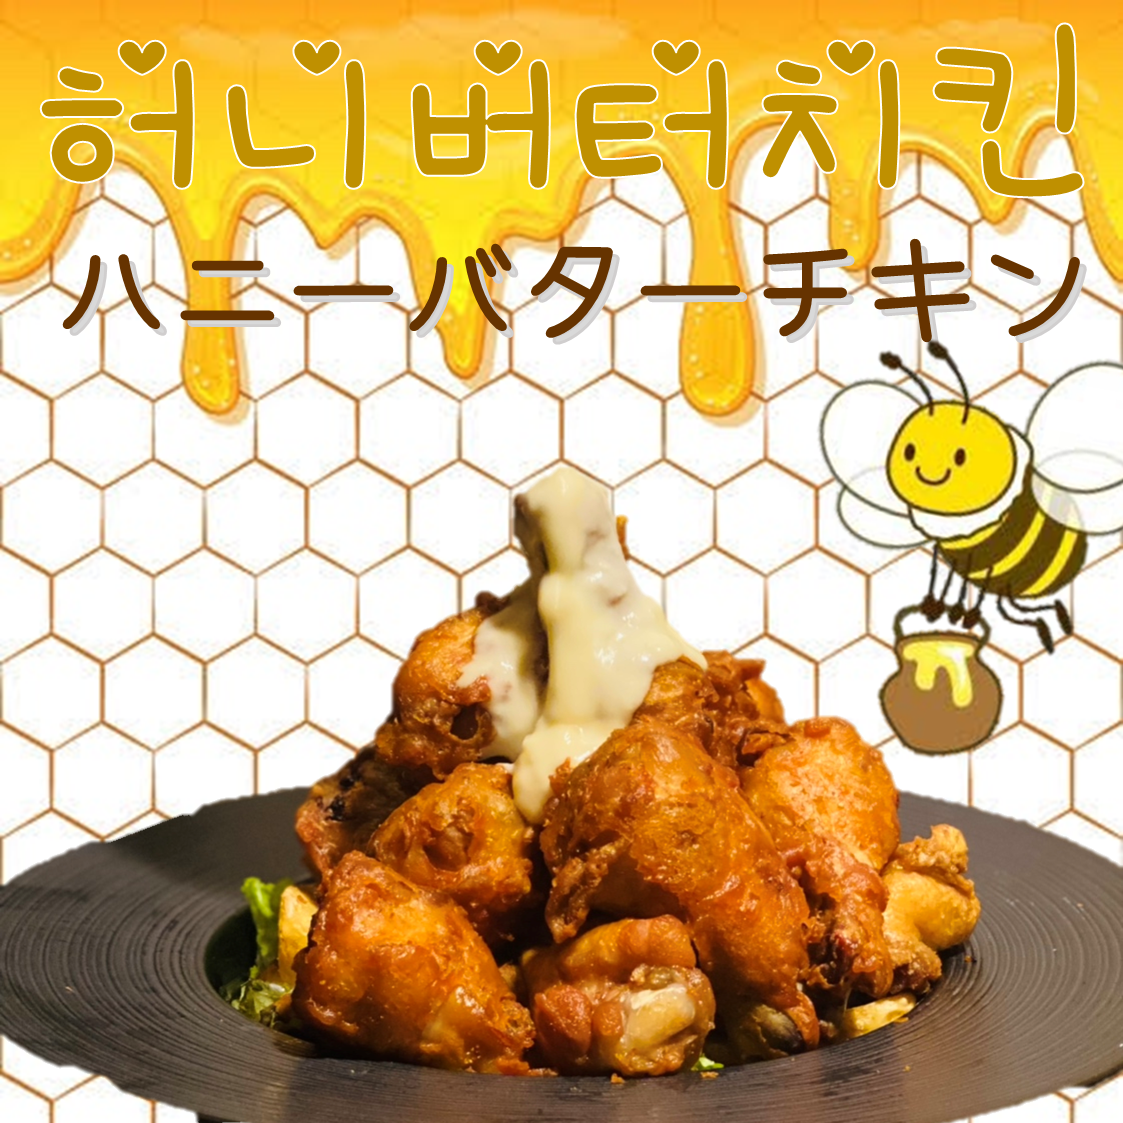 All-you-can-eat honey butter chicken, which is a hot topic in Korea and Japan!